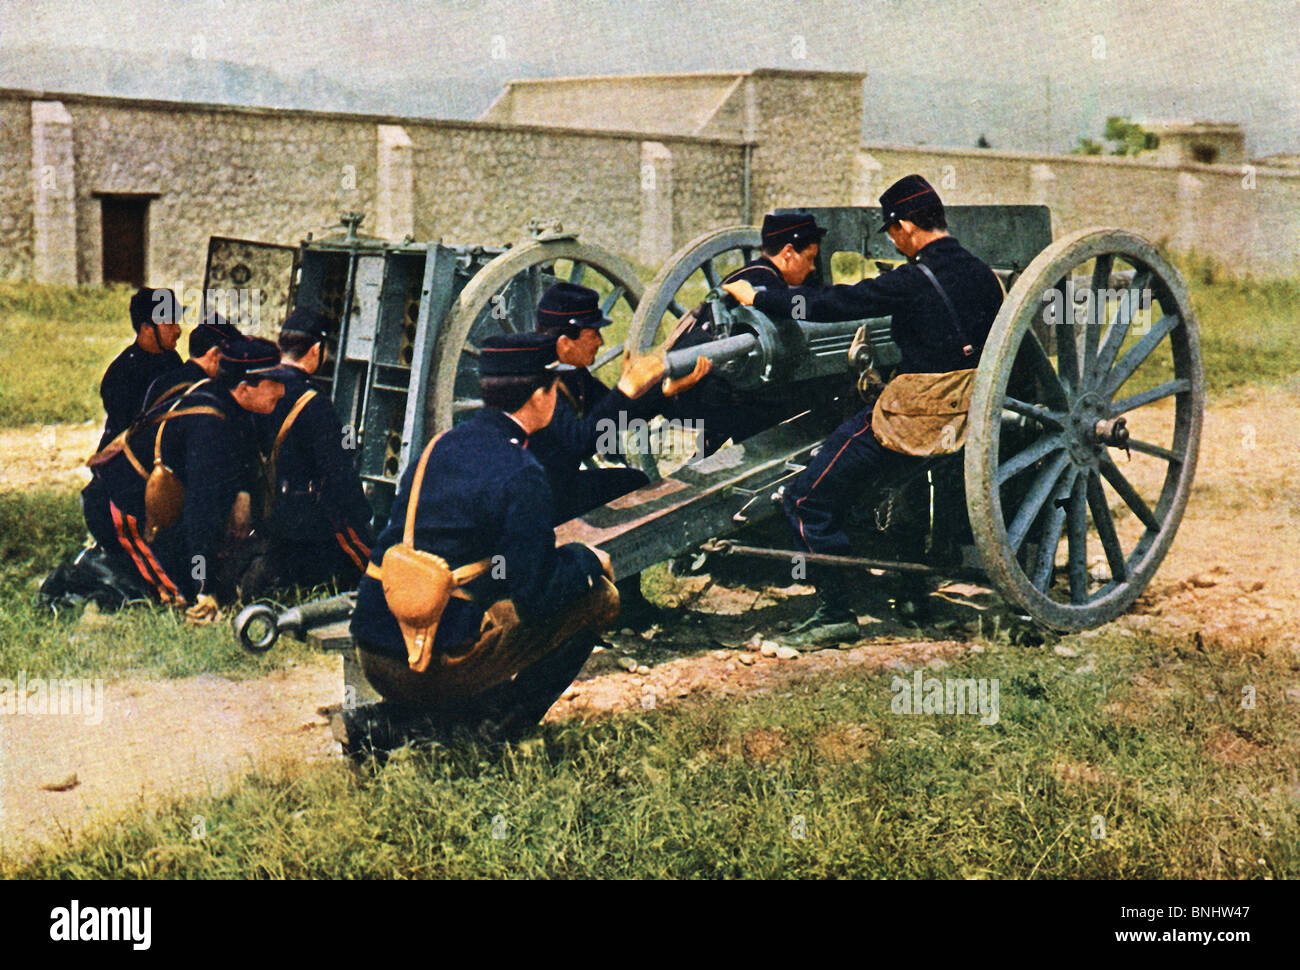 First World War 1914 Infantry 75 mm gun cannon French Army Battle of the Marne France 1914 Soldiers Army Military Historic Stock Photo